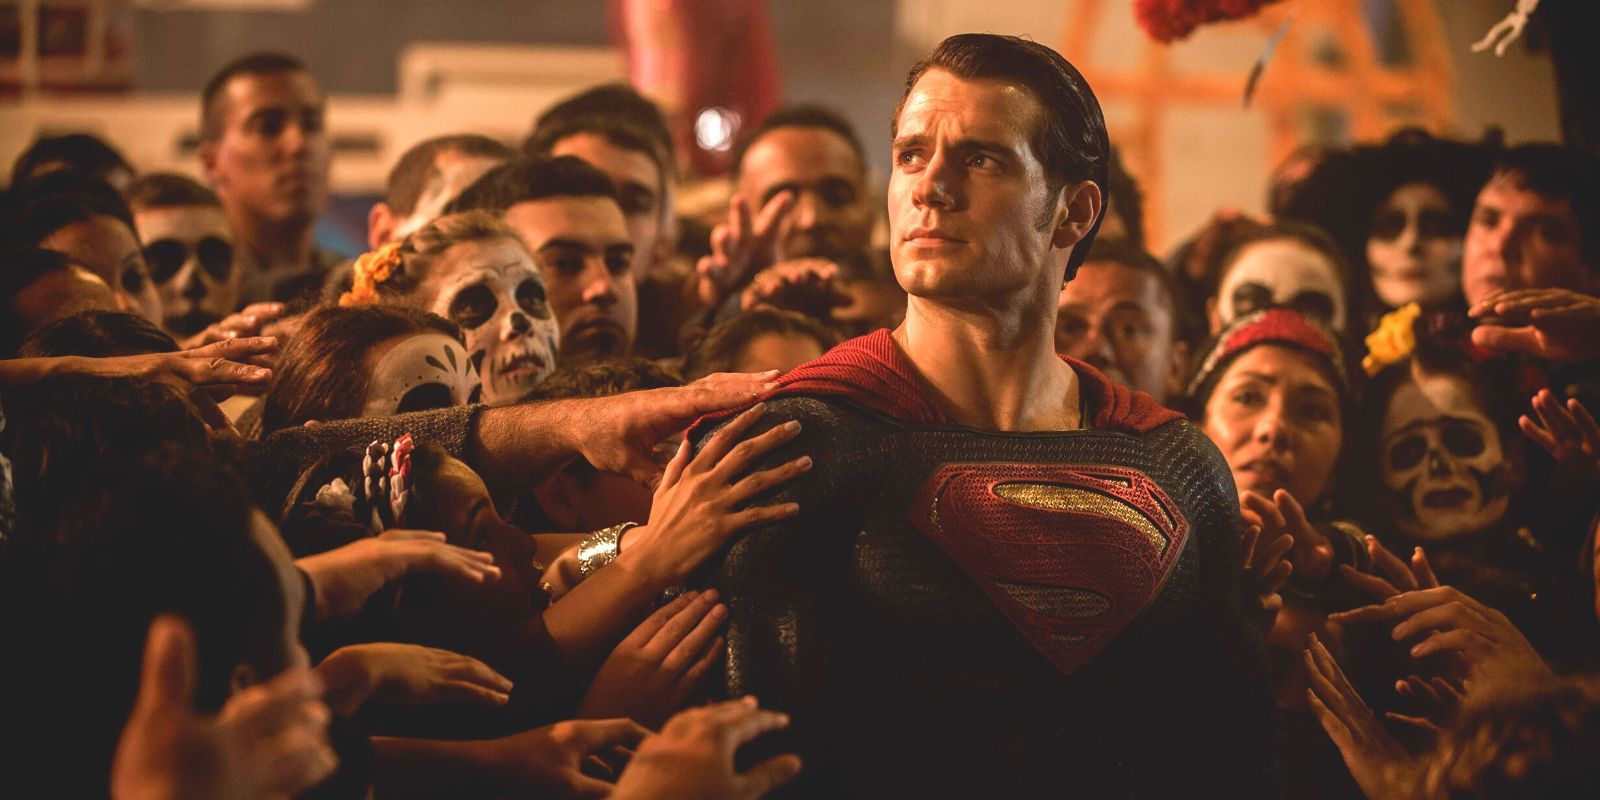 Henry Cavill's Superman surrounded by civilians reaching out to touch him.